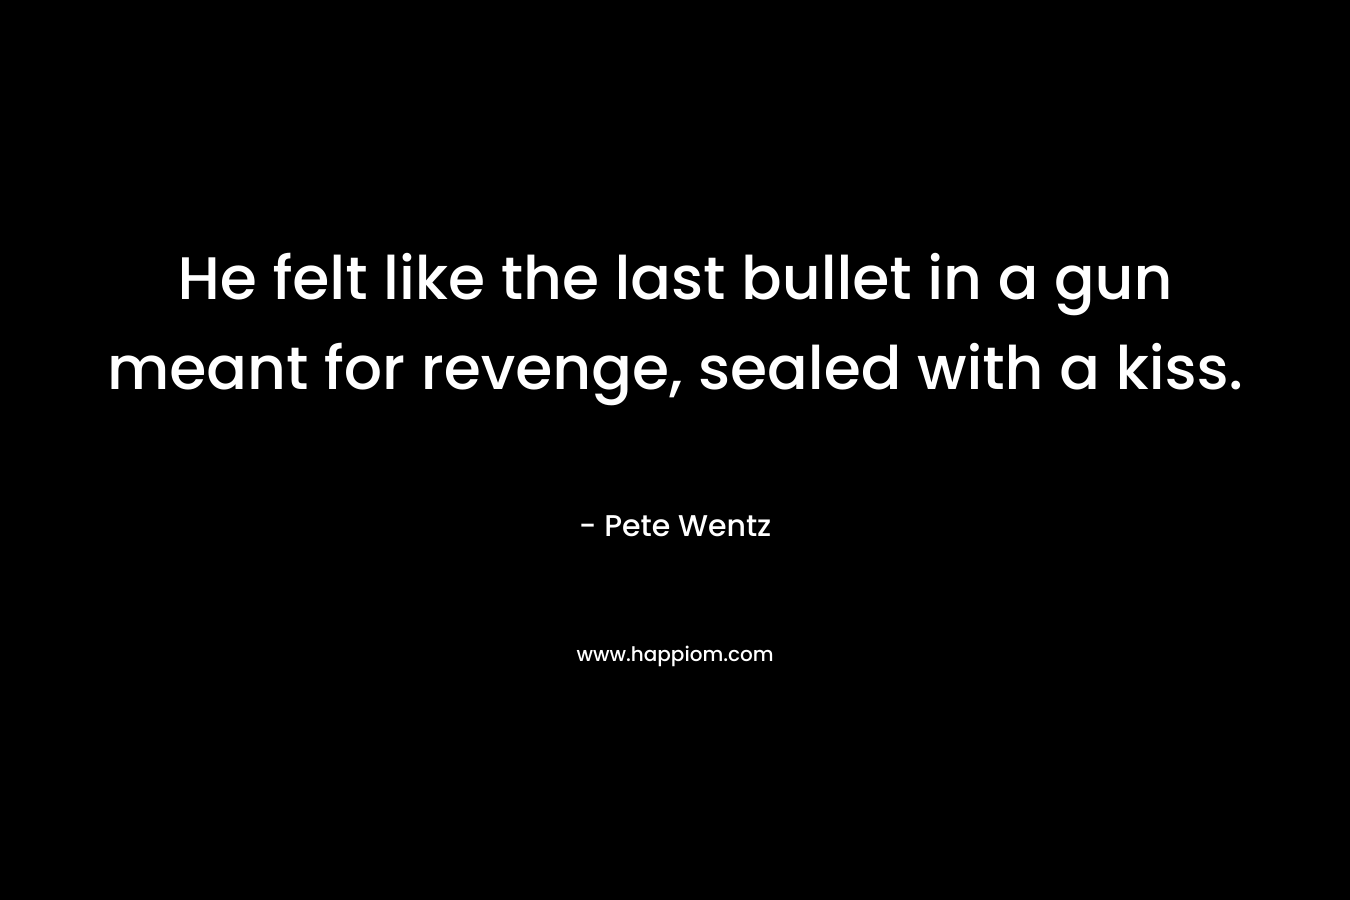 He felt like the last bullet in a gun meant for revenge, sealed with a kiss. – Pete Wentz